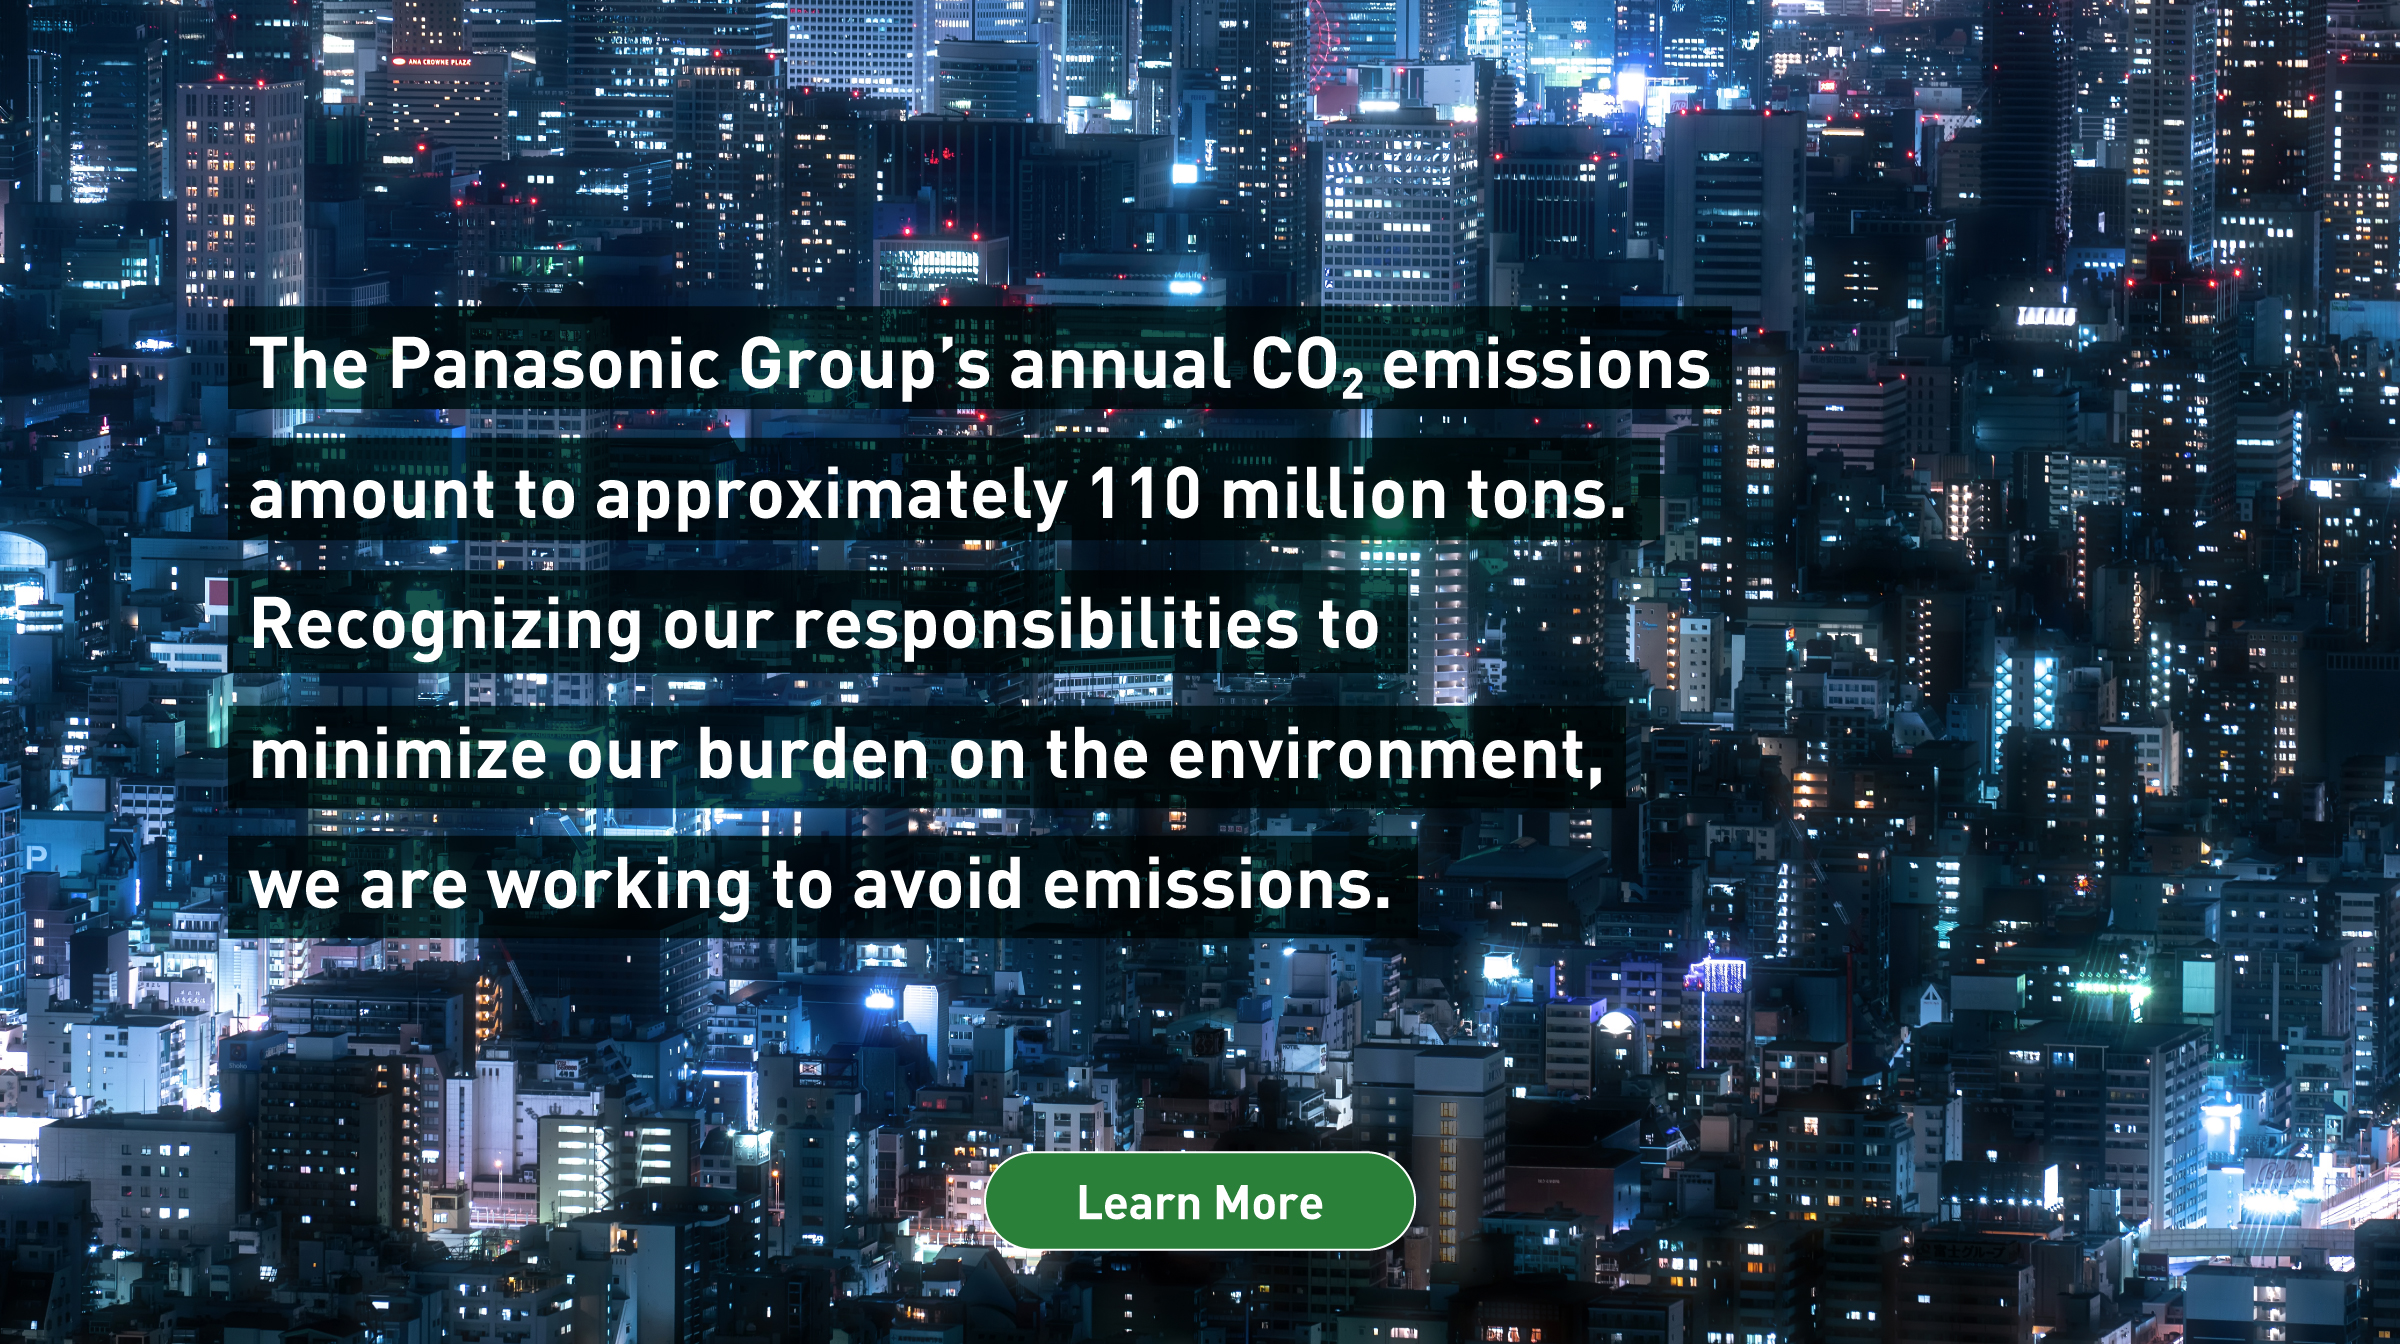 Panasonic Group’s annual CO2 emissions amount to approximately 110 million tons. Learn More 